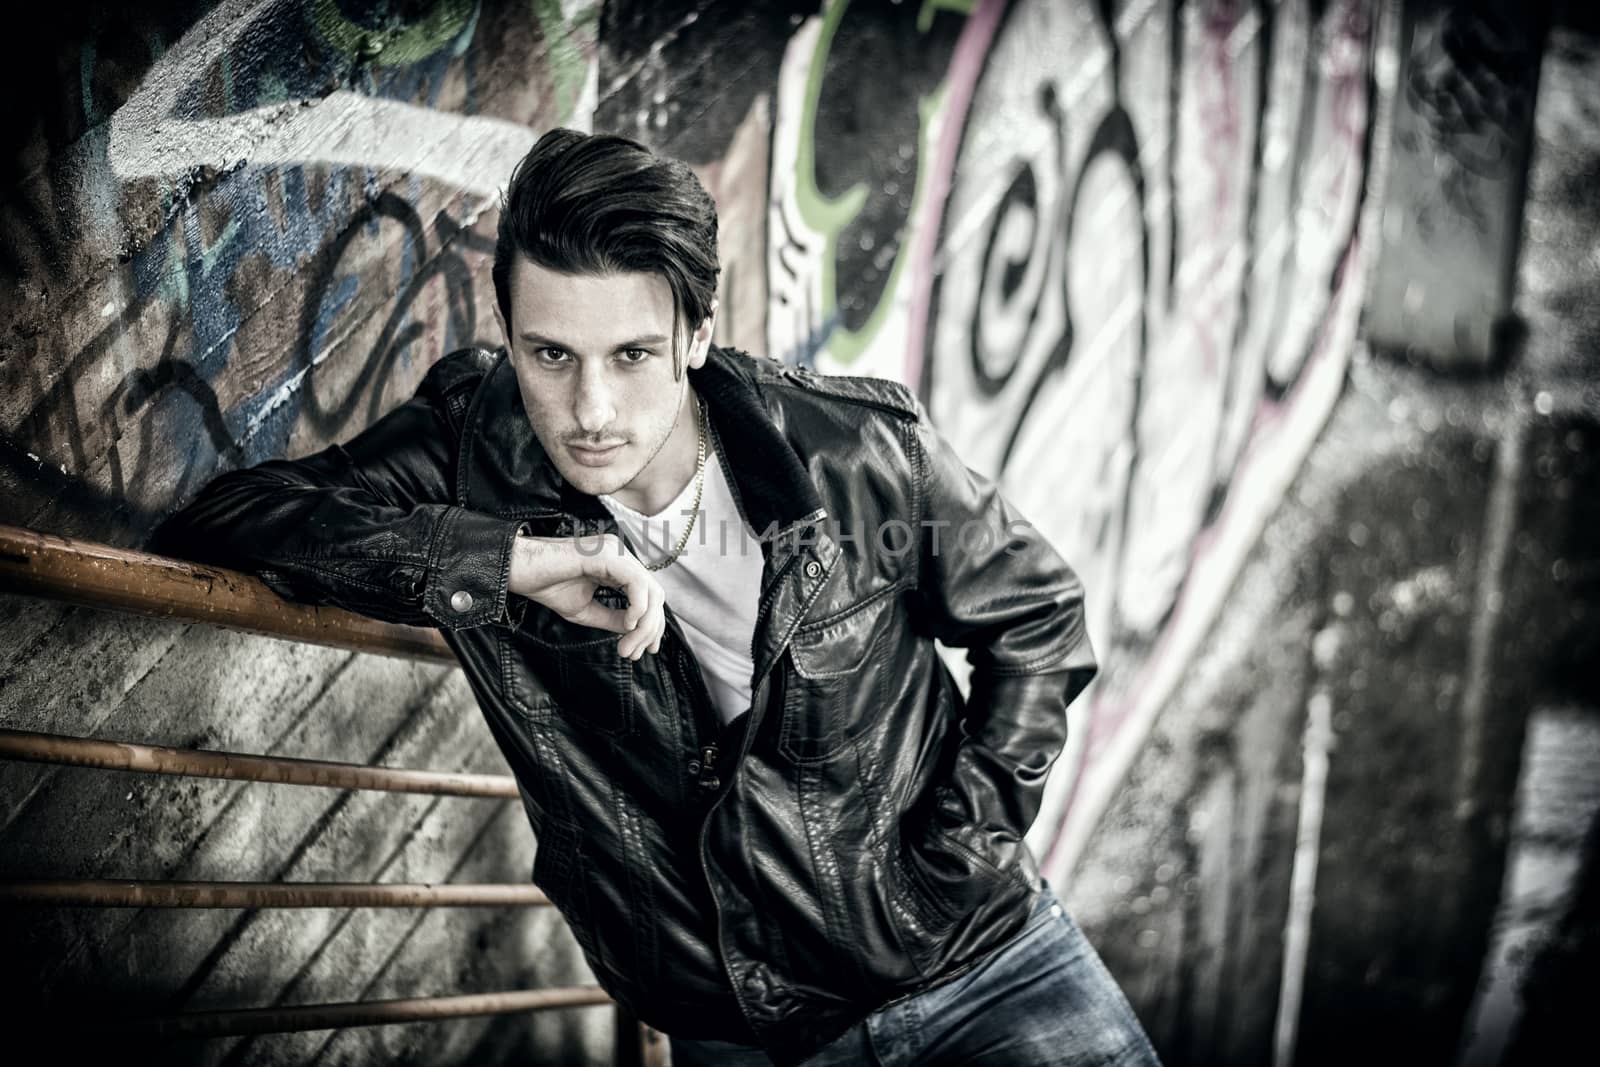 Young man standing outdoors in urban setting by artofphoto